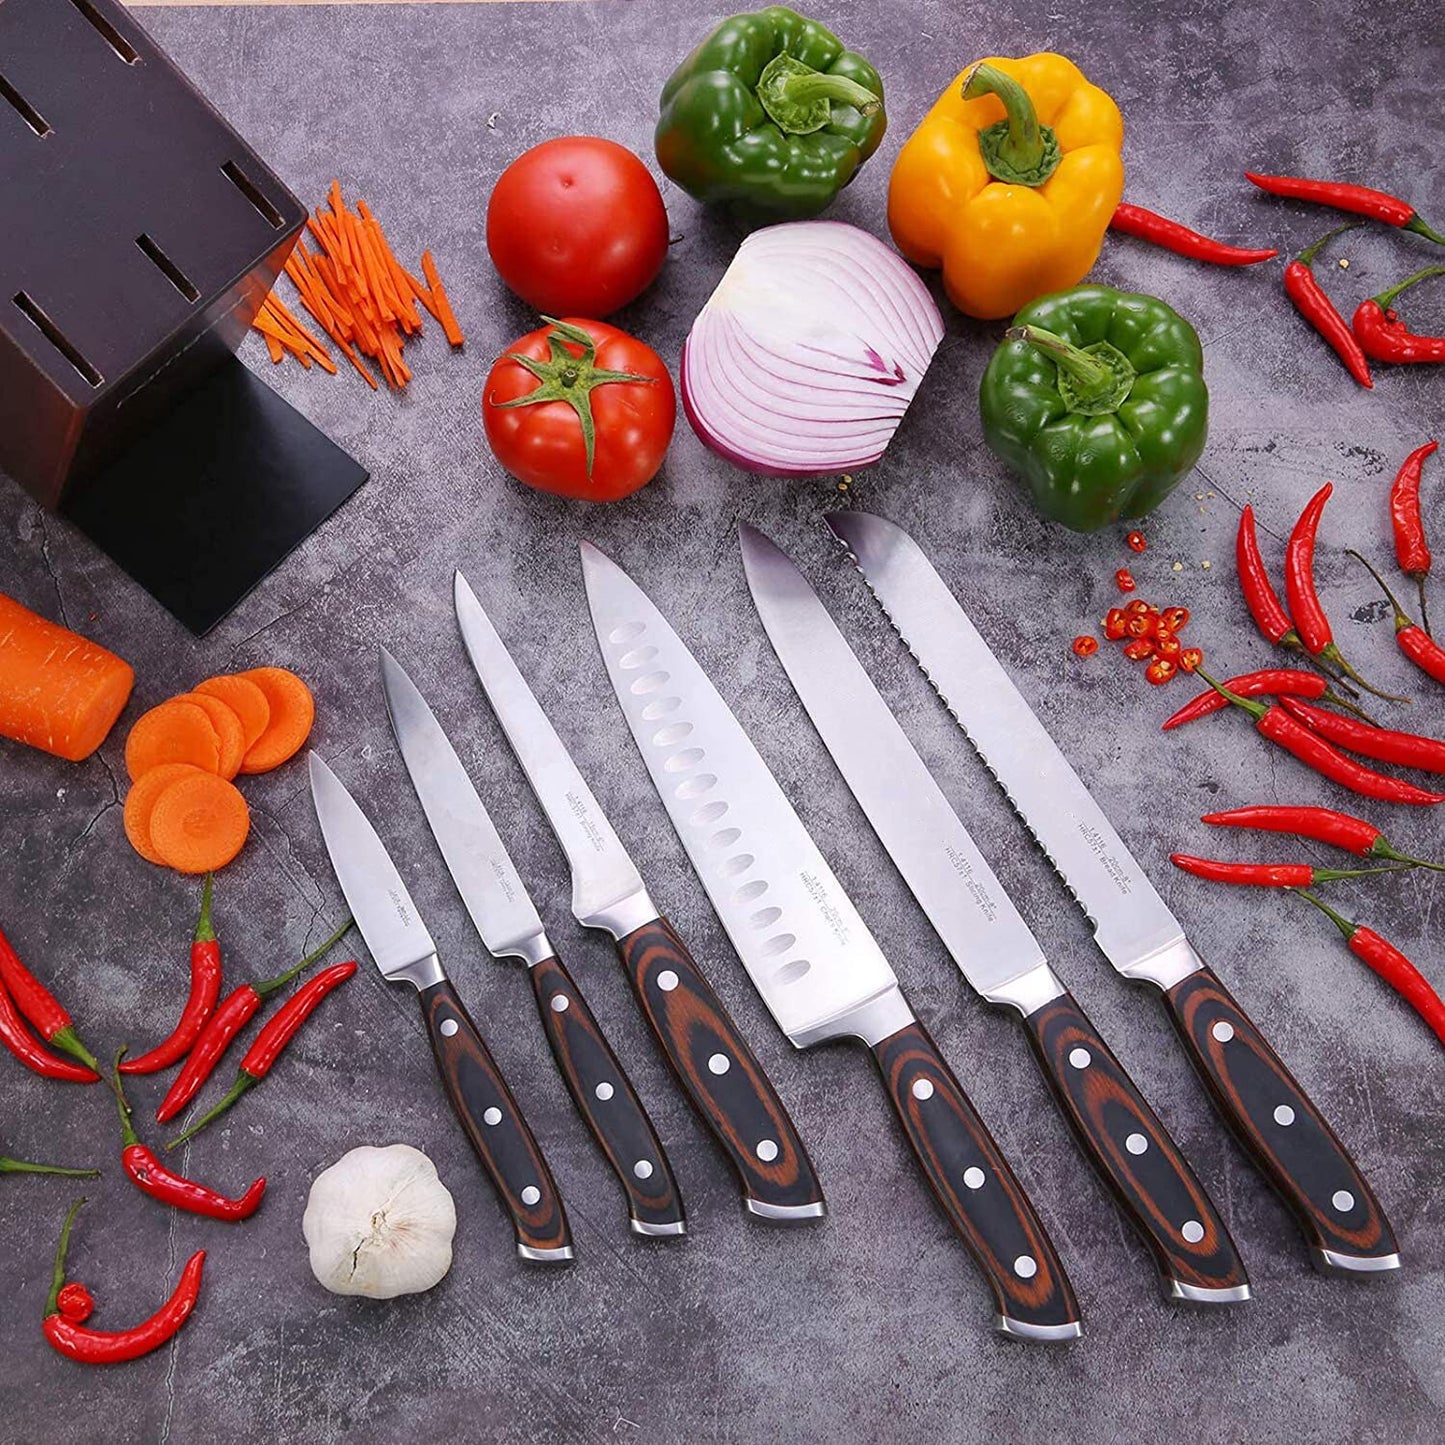 7 Knife Pro Chef Set German 1.4116 Stainless Steel